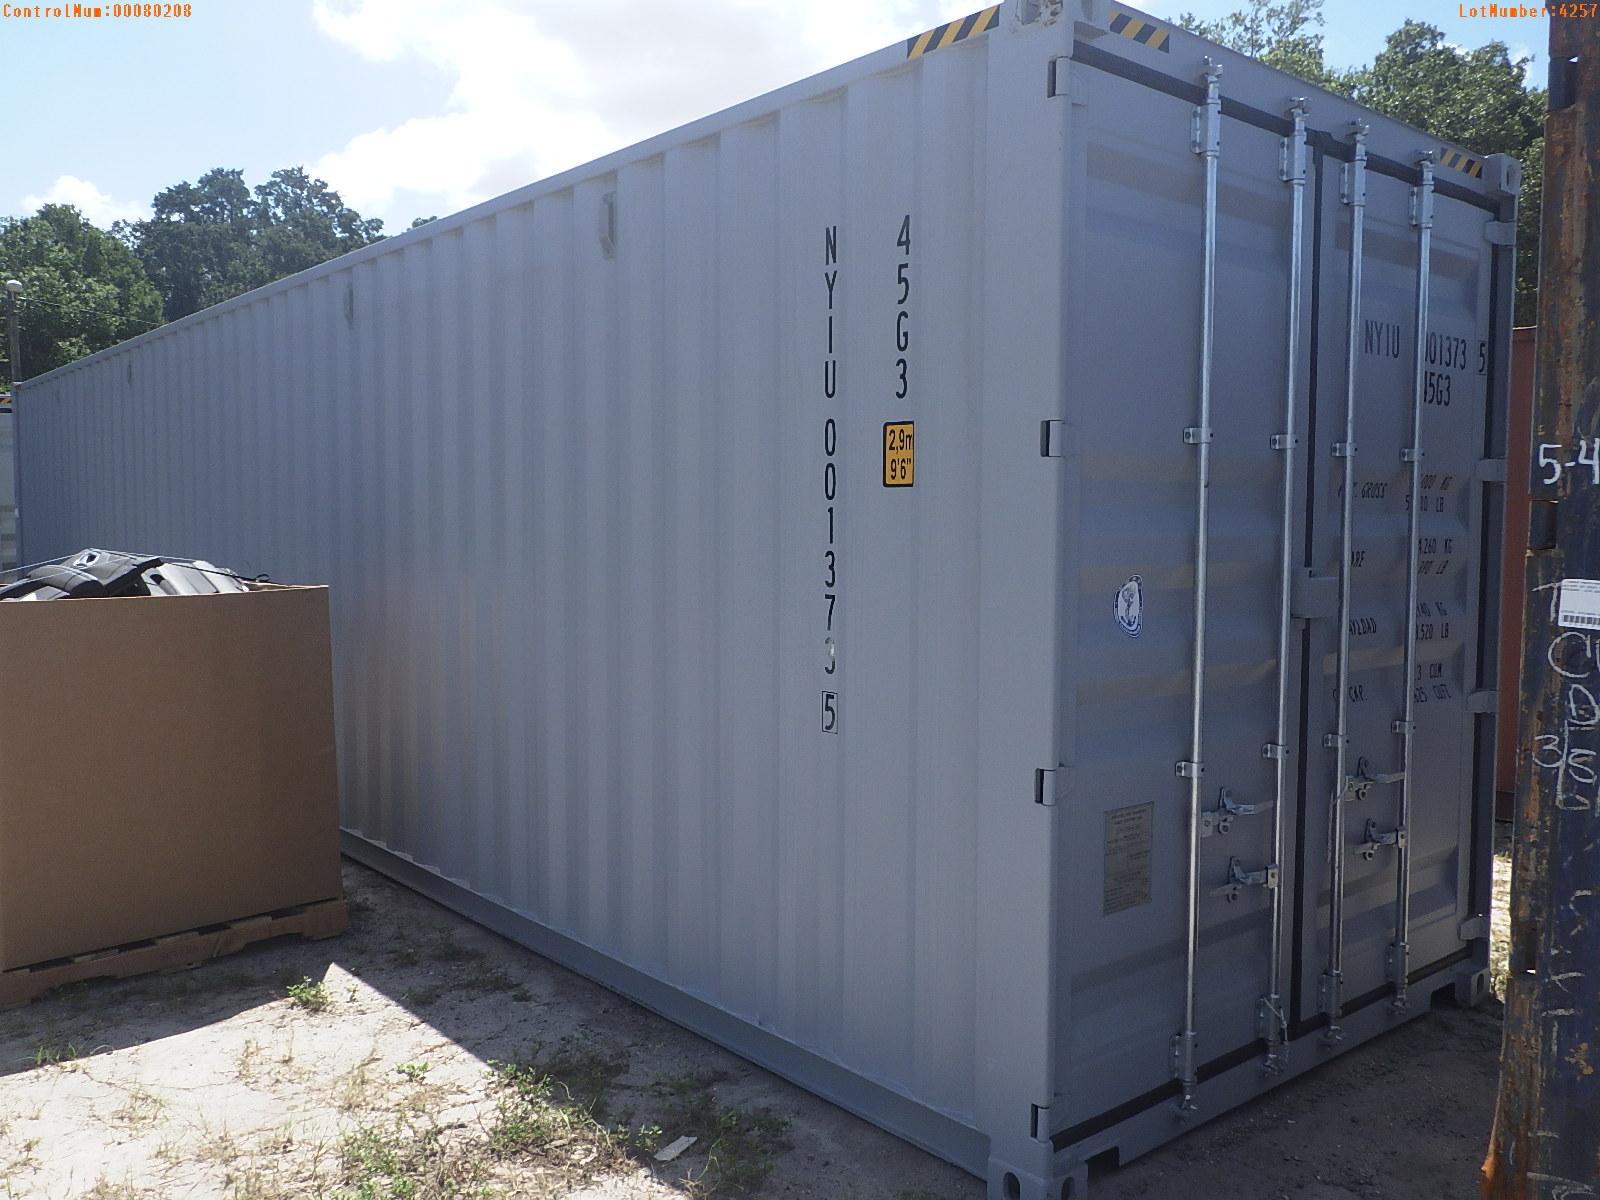 5-04257 (Equip.-Container)  Seller:Private/Dealer 40 FOOT METAL SHIPPING CONTAIN